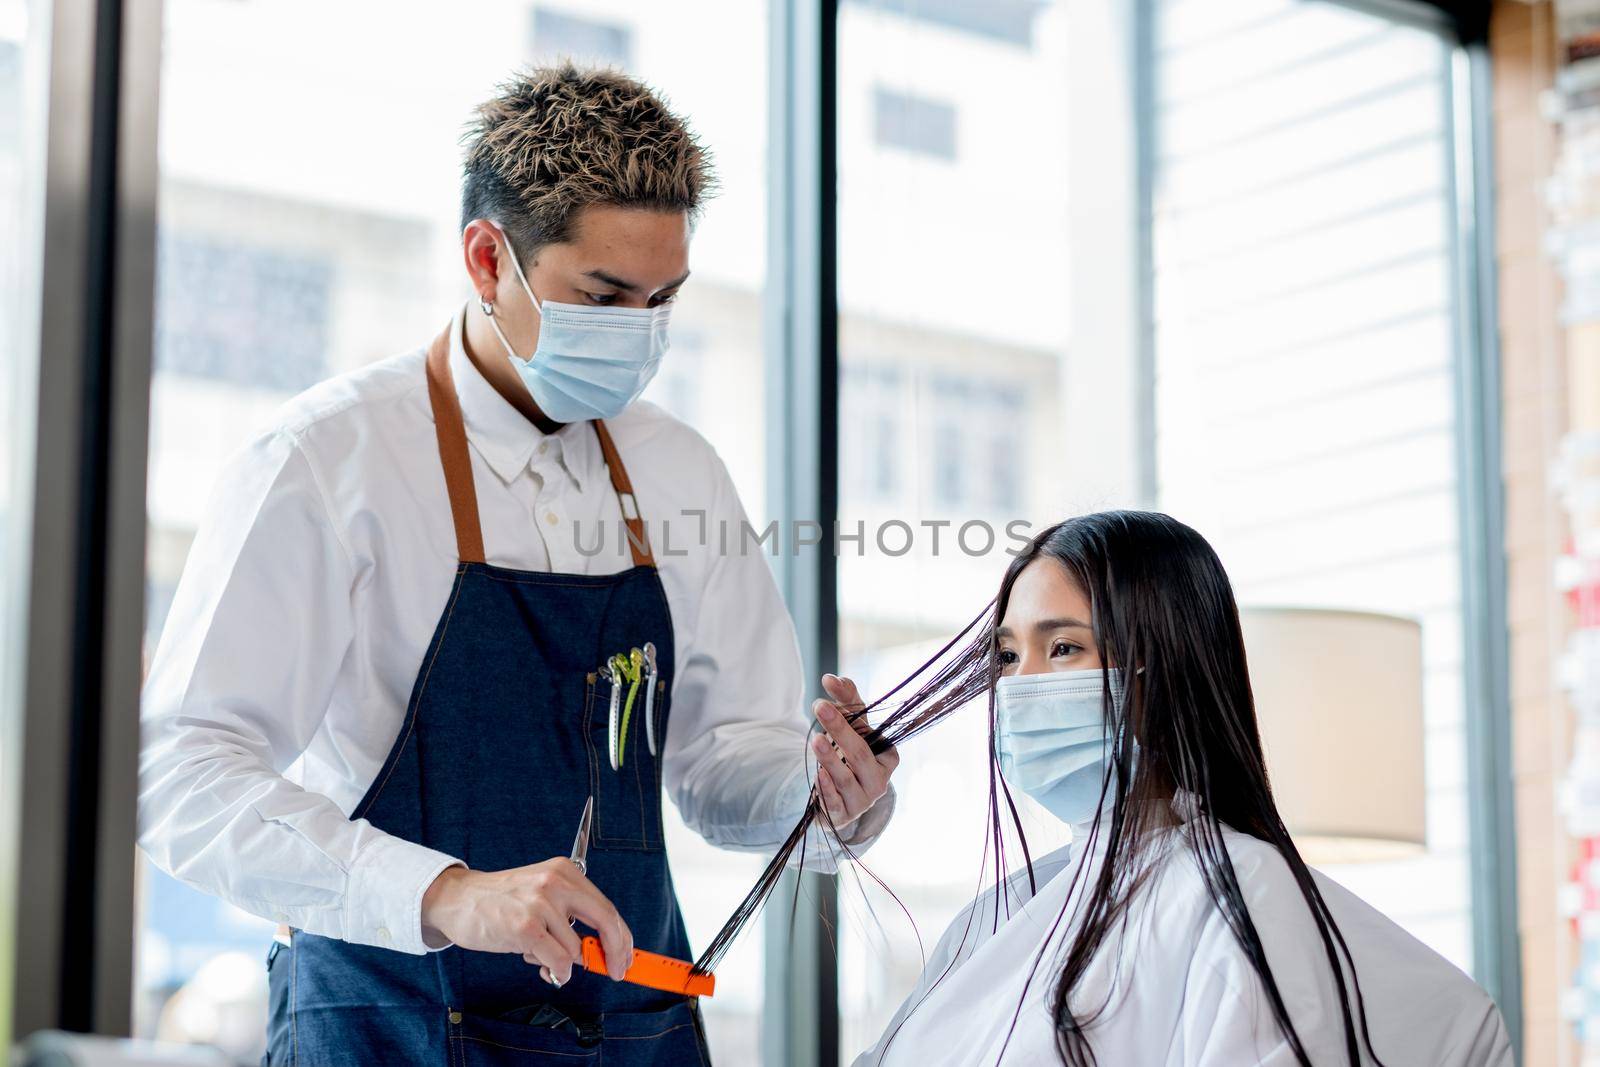 Asian beauty salon barber man with hygiene mask stand and process of hair cut of long hair customer and woman also wear hygiene mask. Concept of beauty business during Covid-19 pandemic.